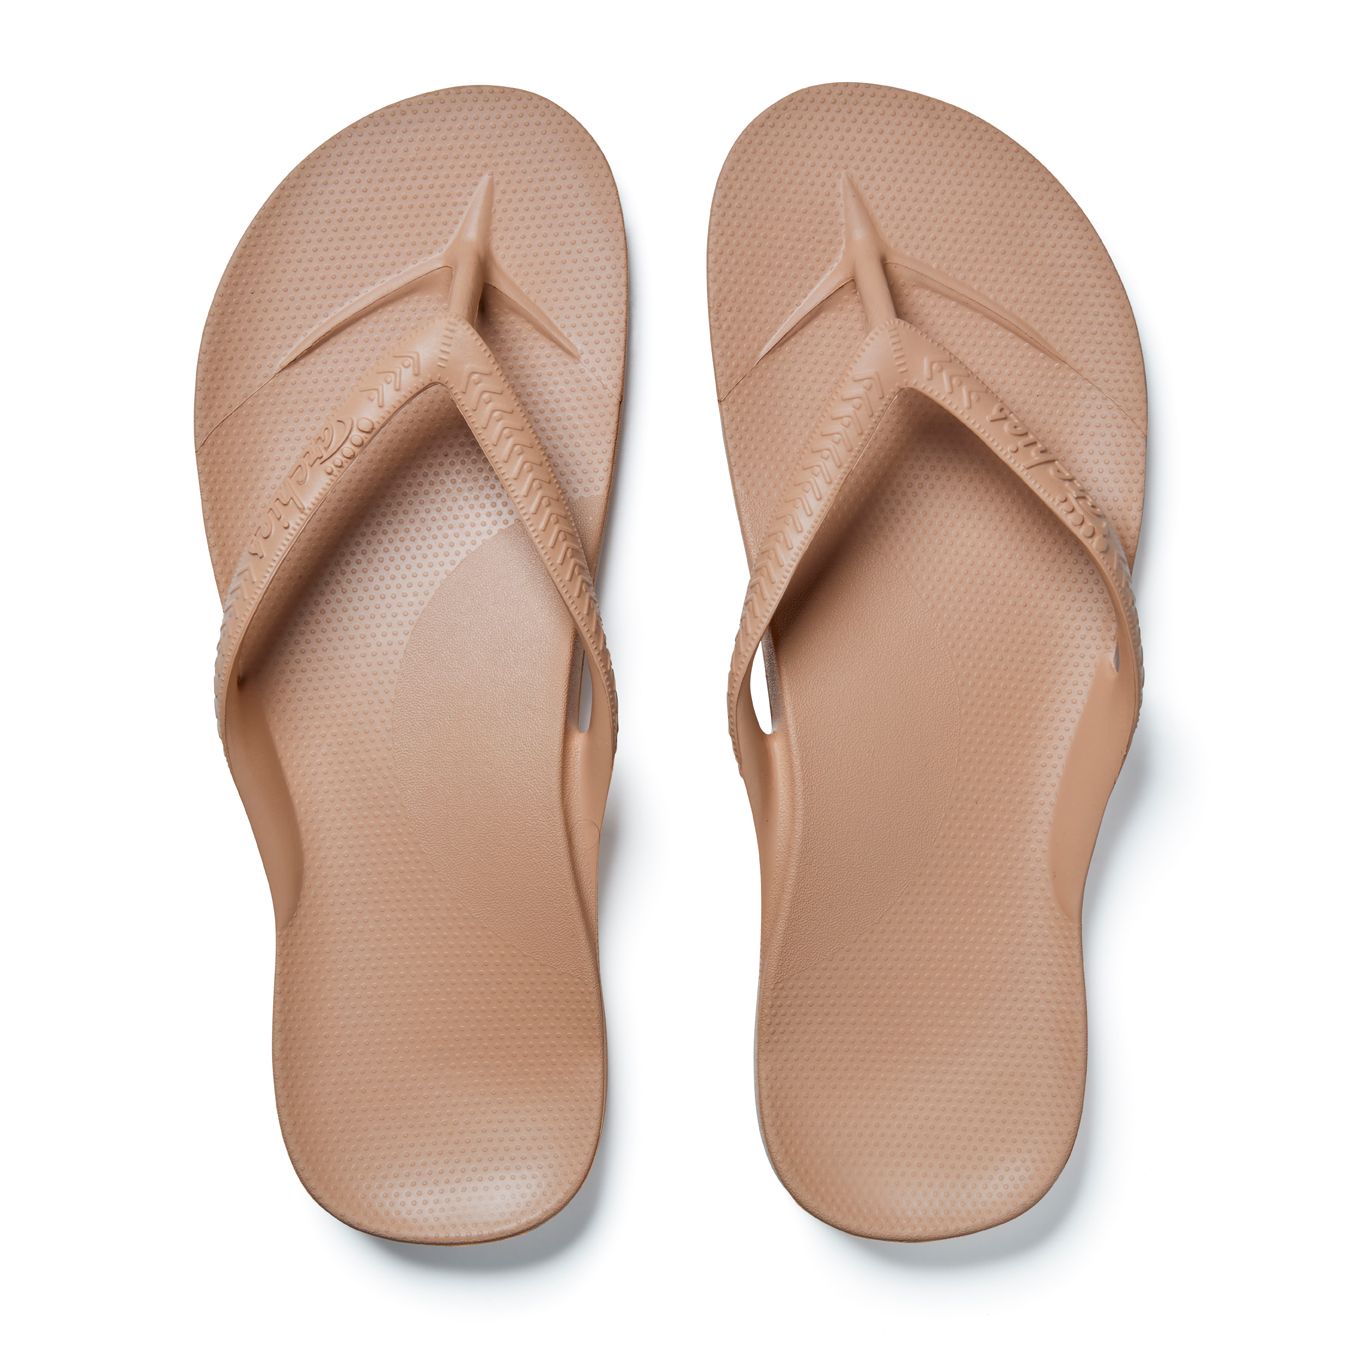 Archies Thongs - Your Perfect Mate for Summer - Dynamic Podiatry